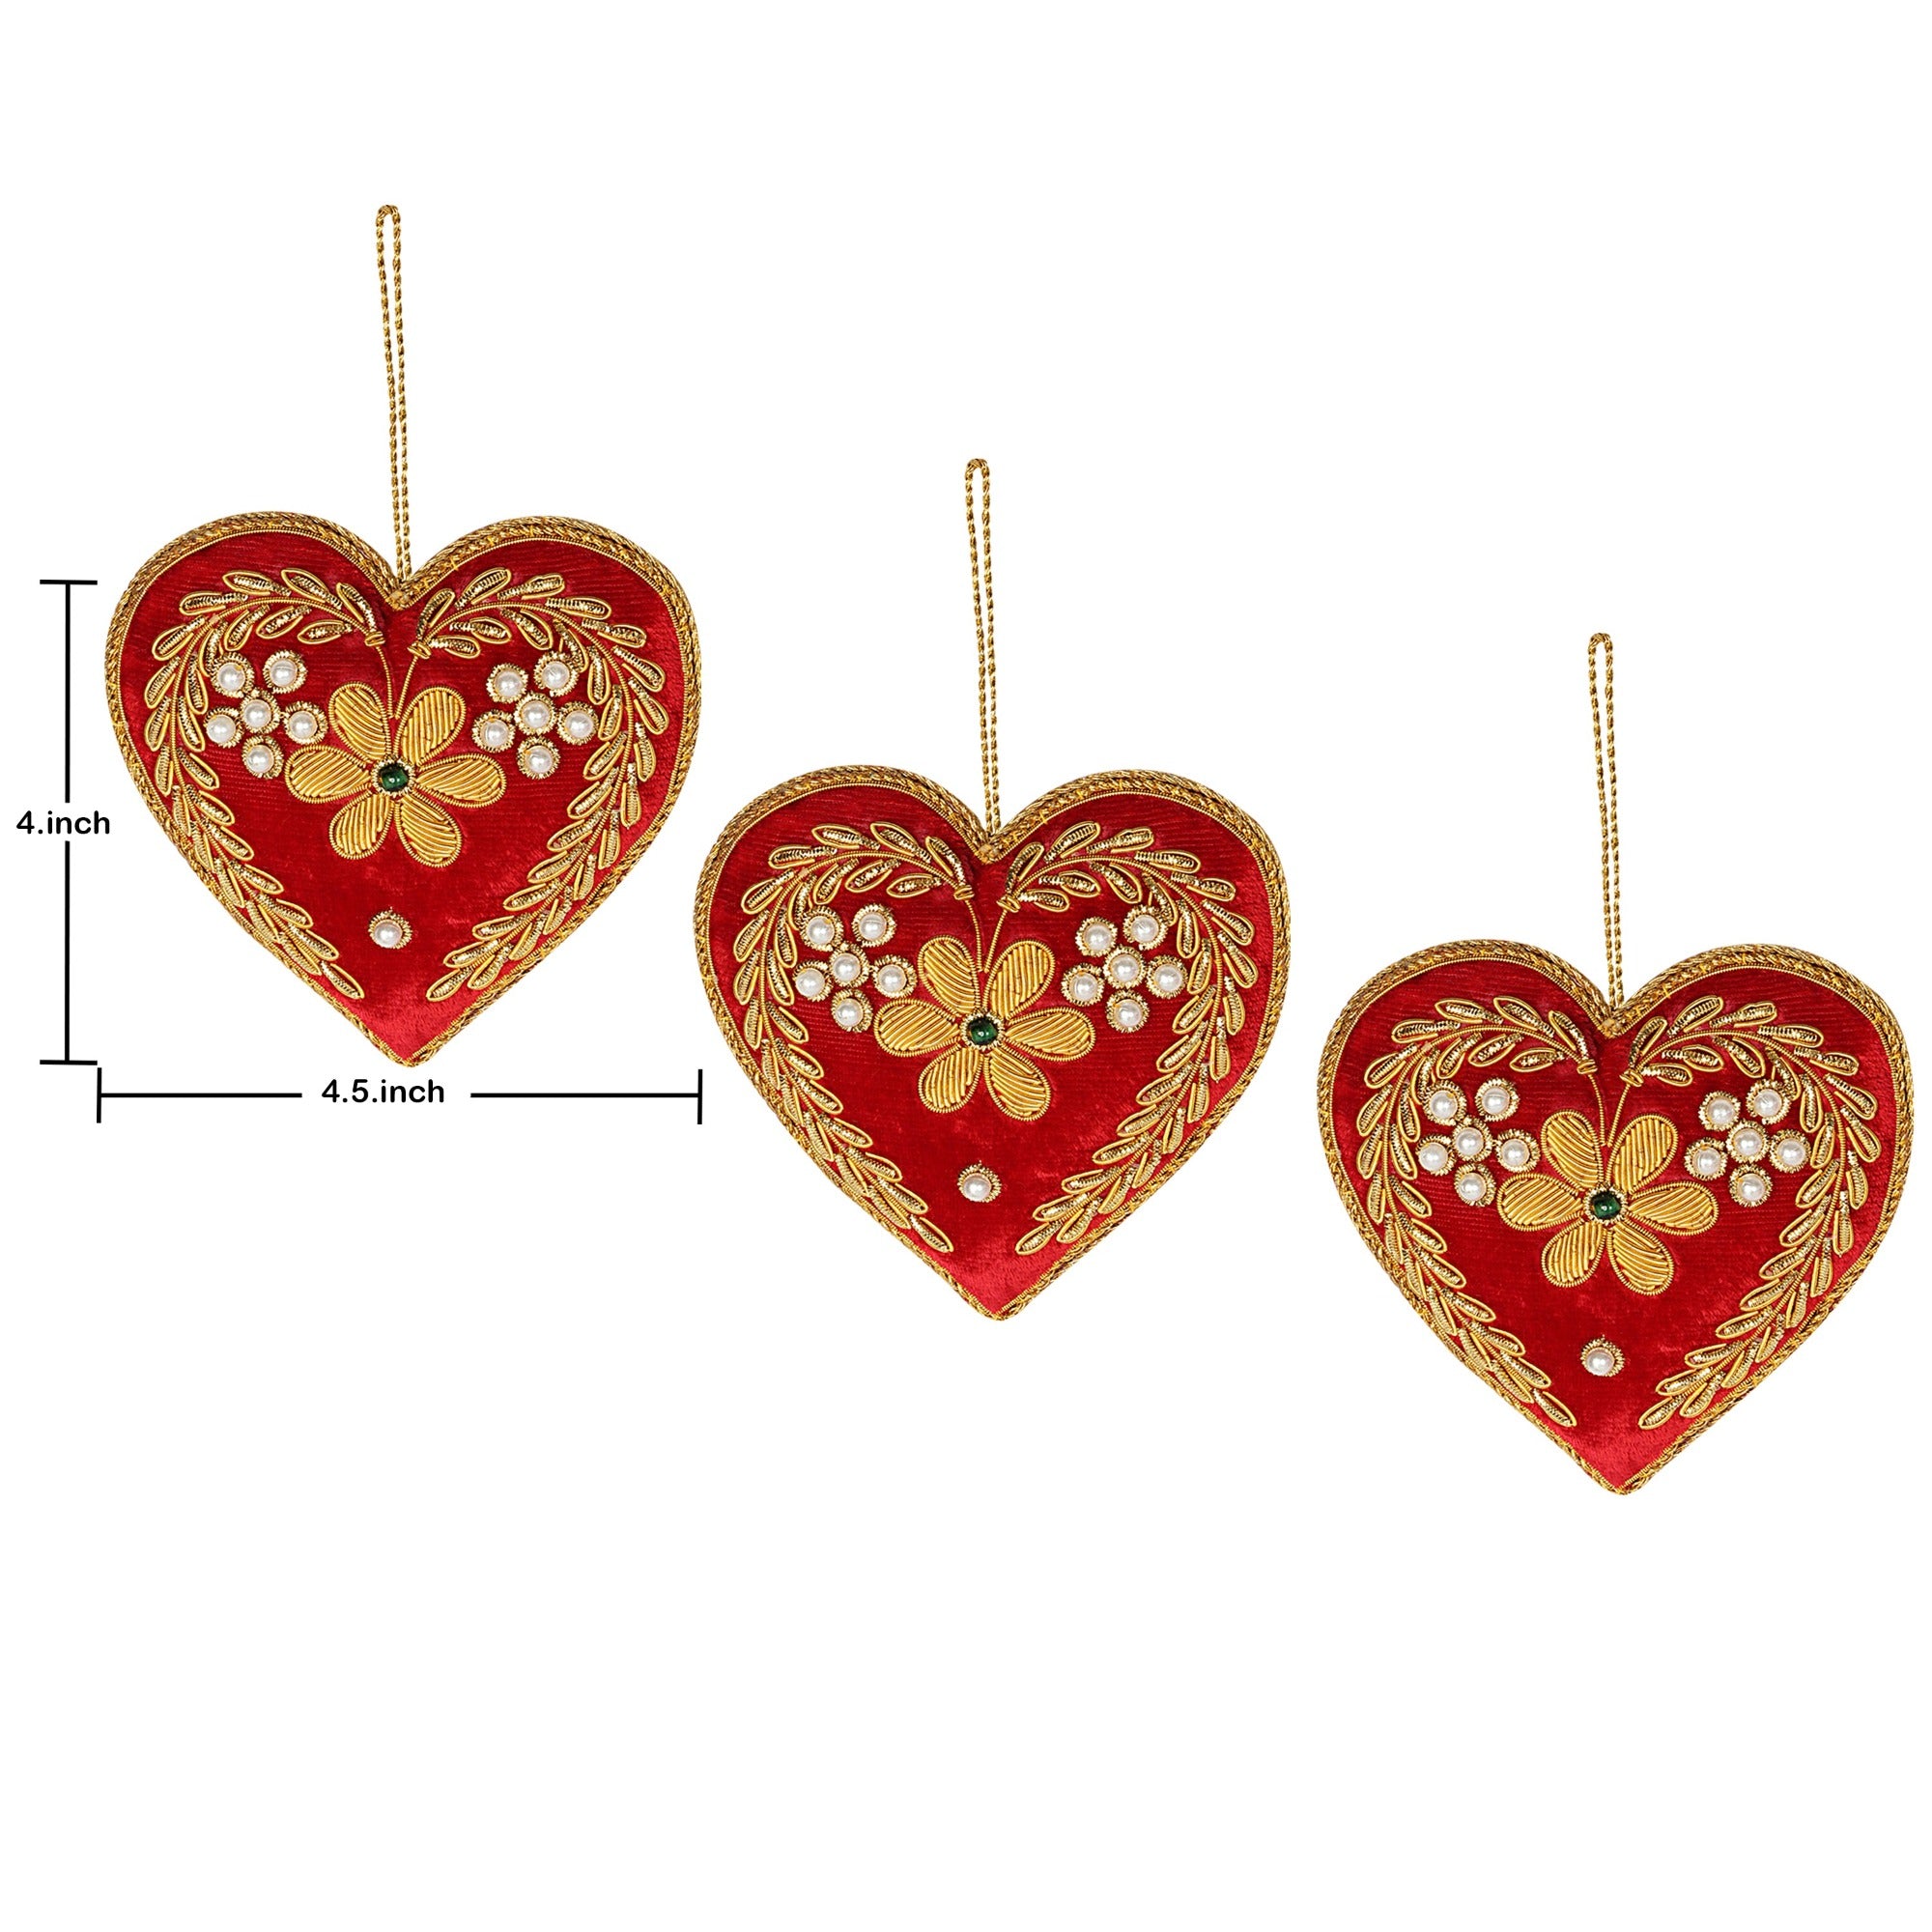 Holiday Hearts Red Christmas ornaments set of 3 pieces for holiday decor (1SET=3PC)